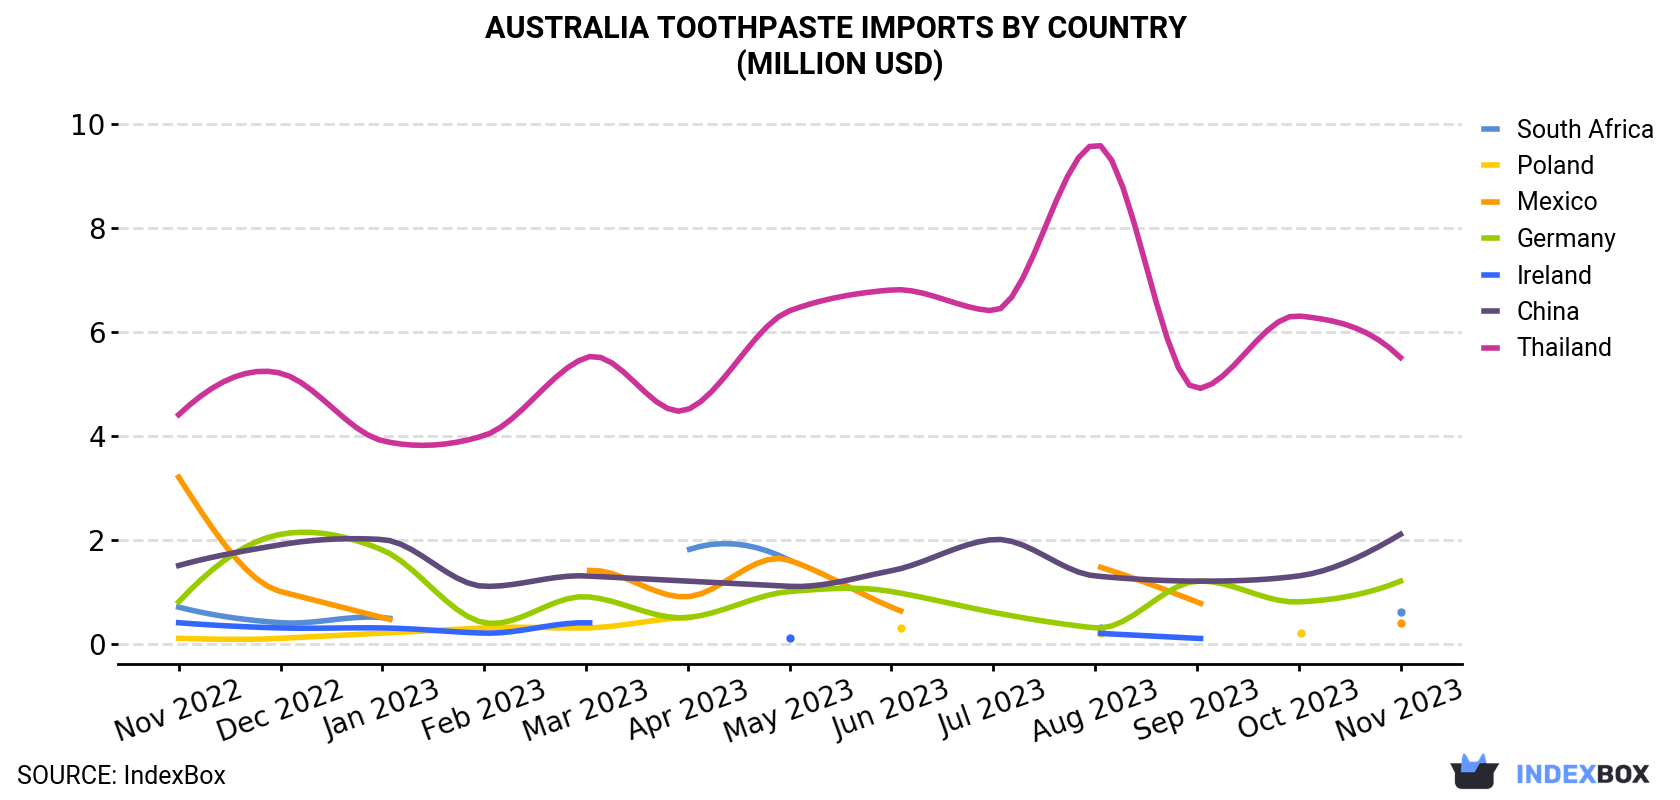 Australia Toothpaste Imports By Country (Million USD)